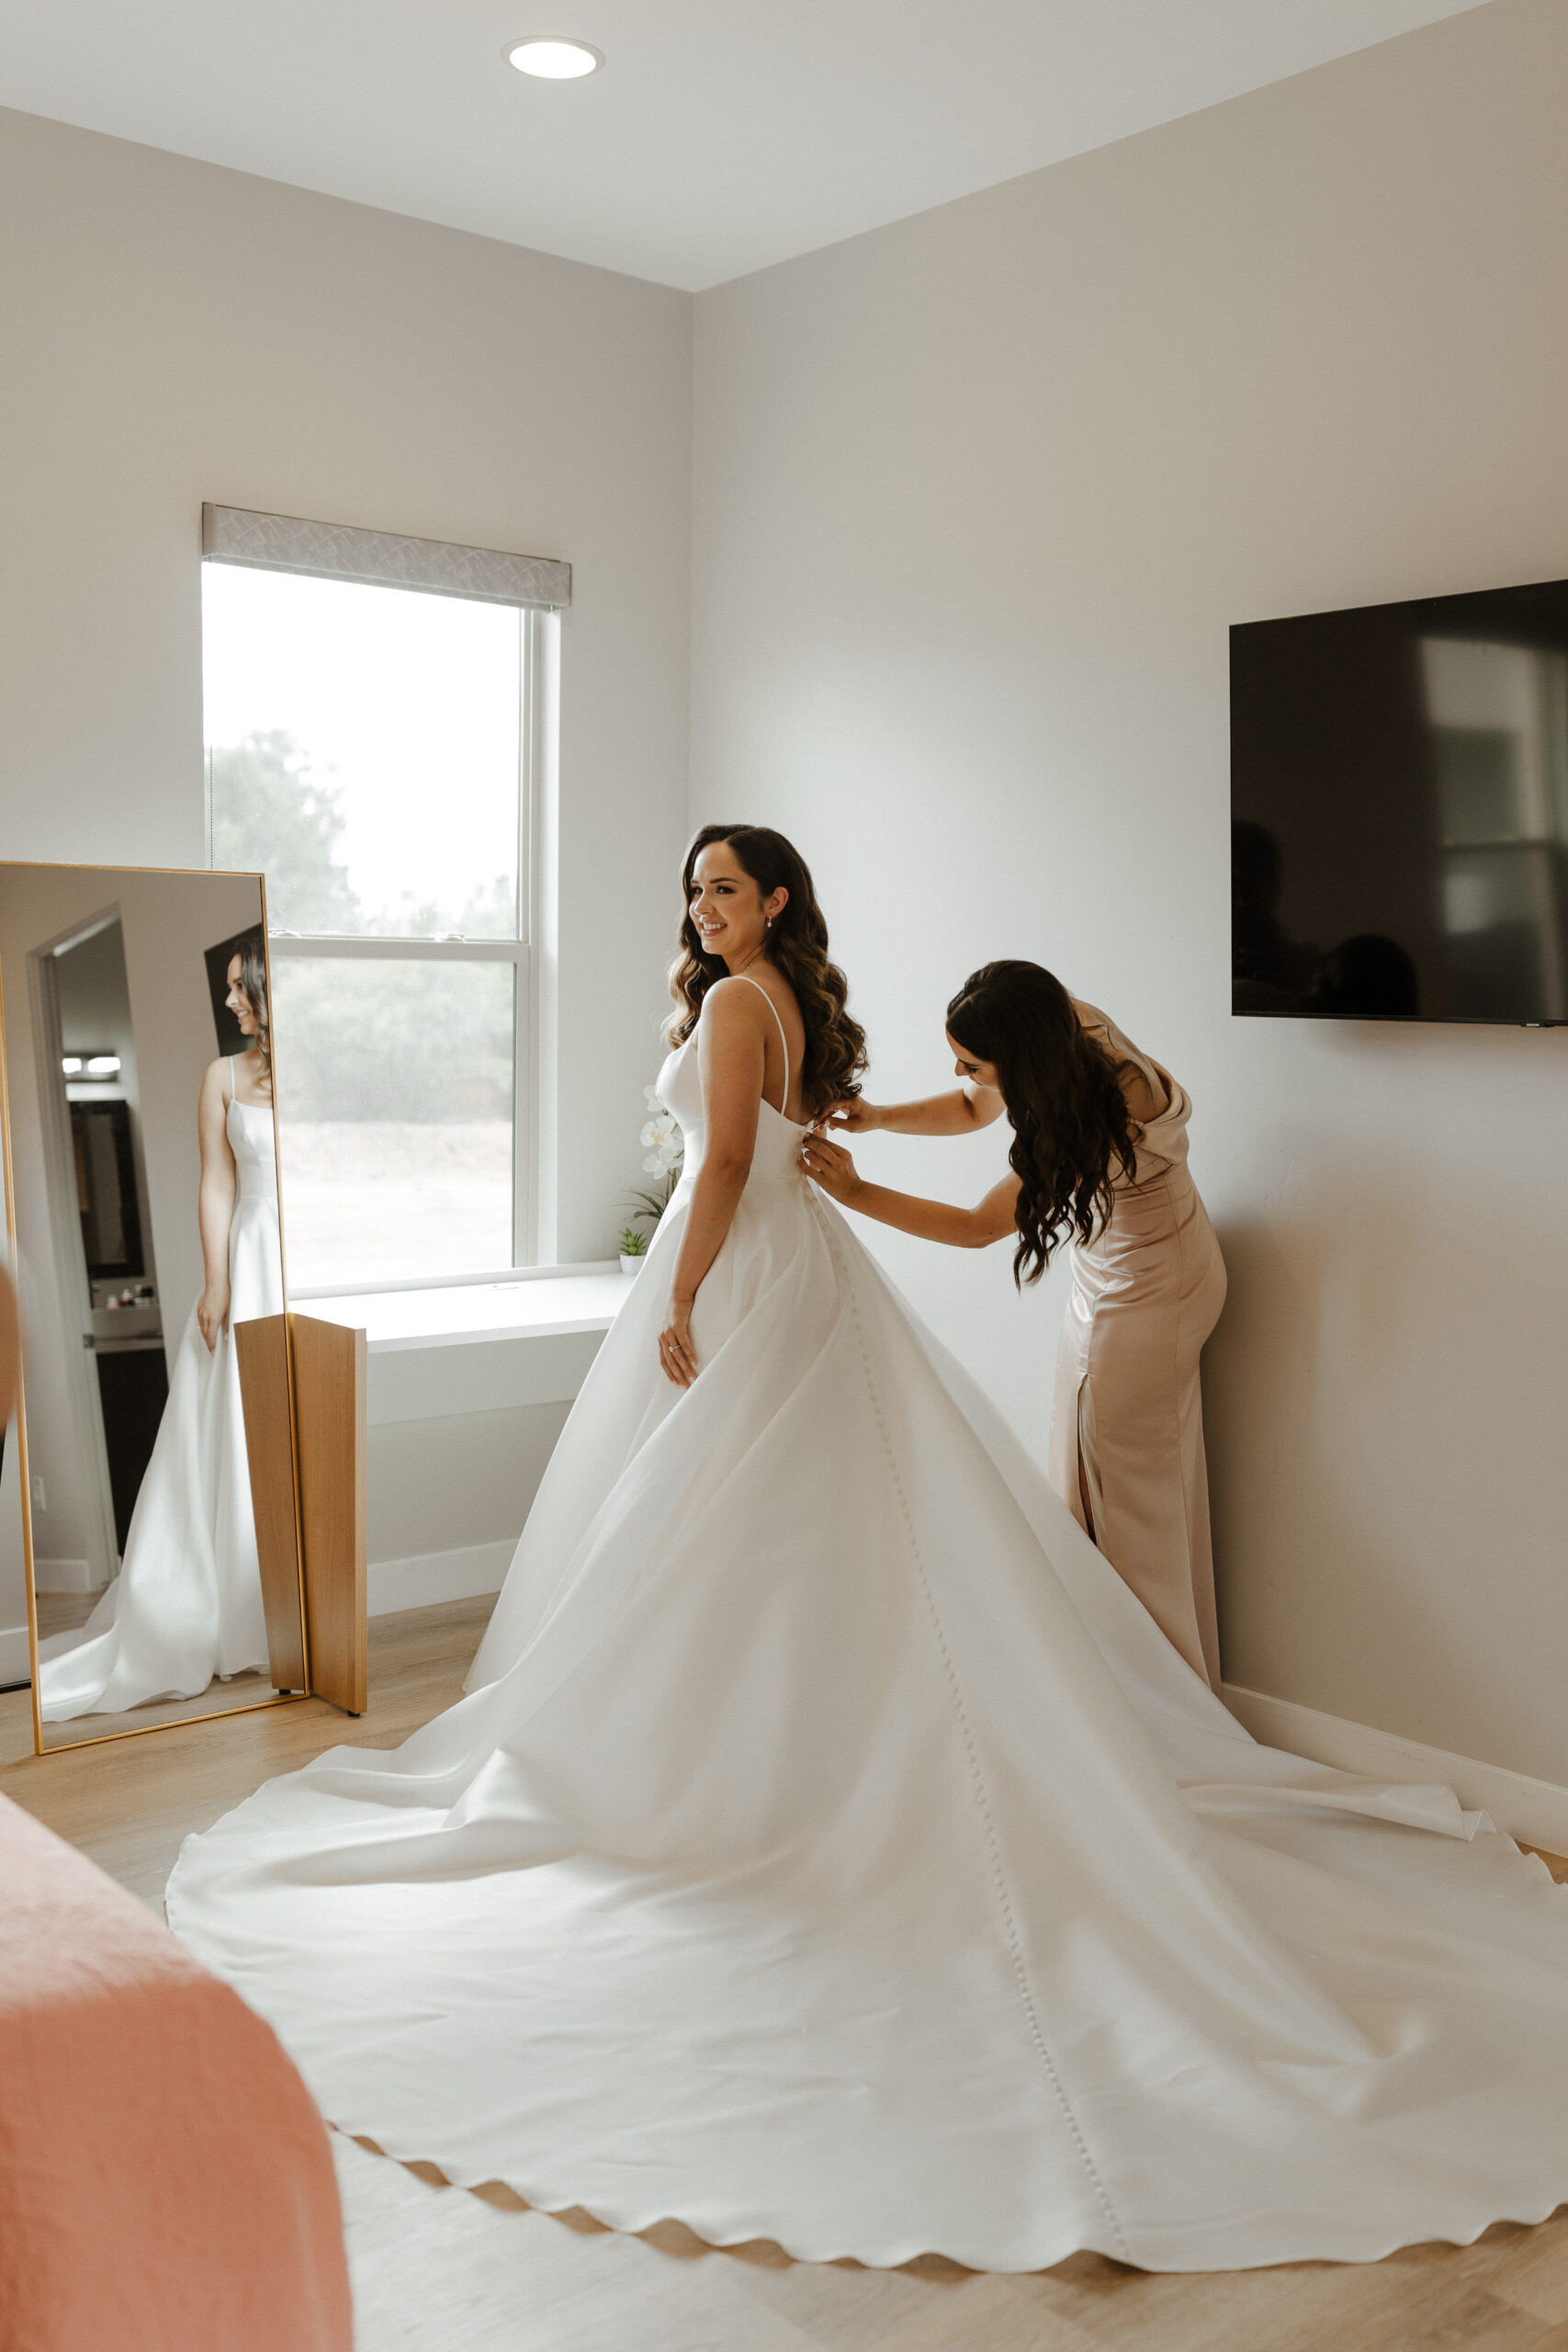 bride putting dress on with help